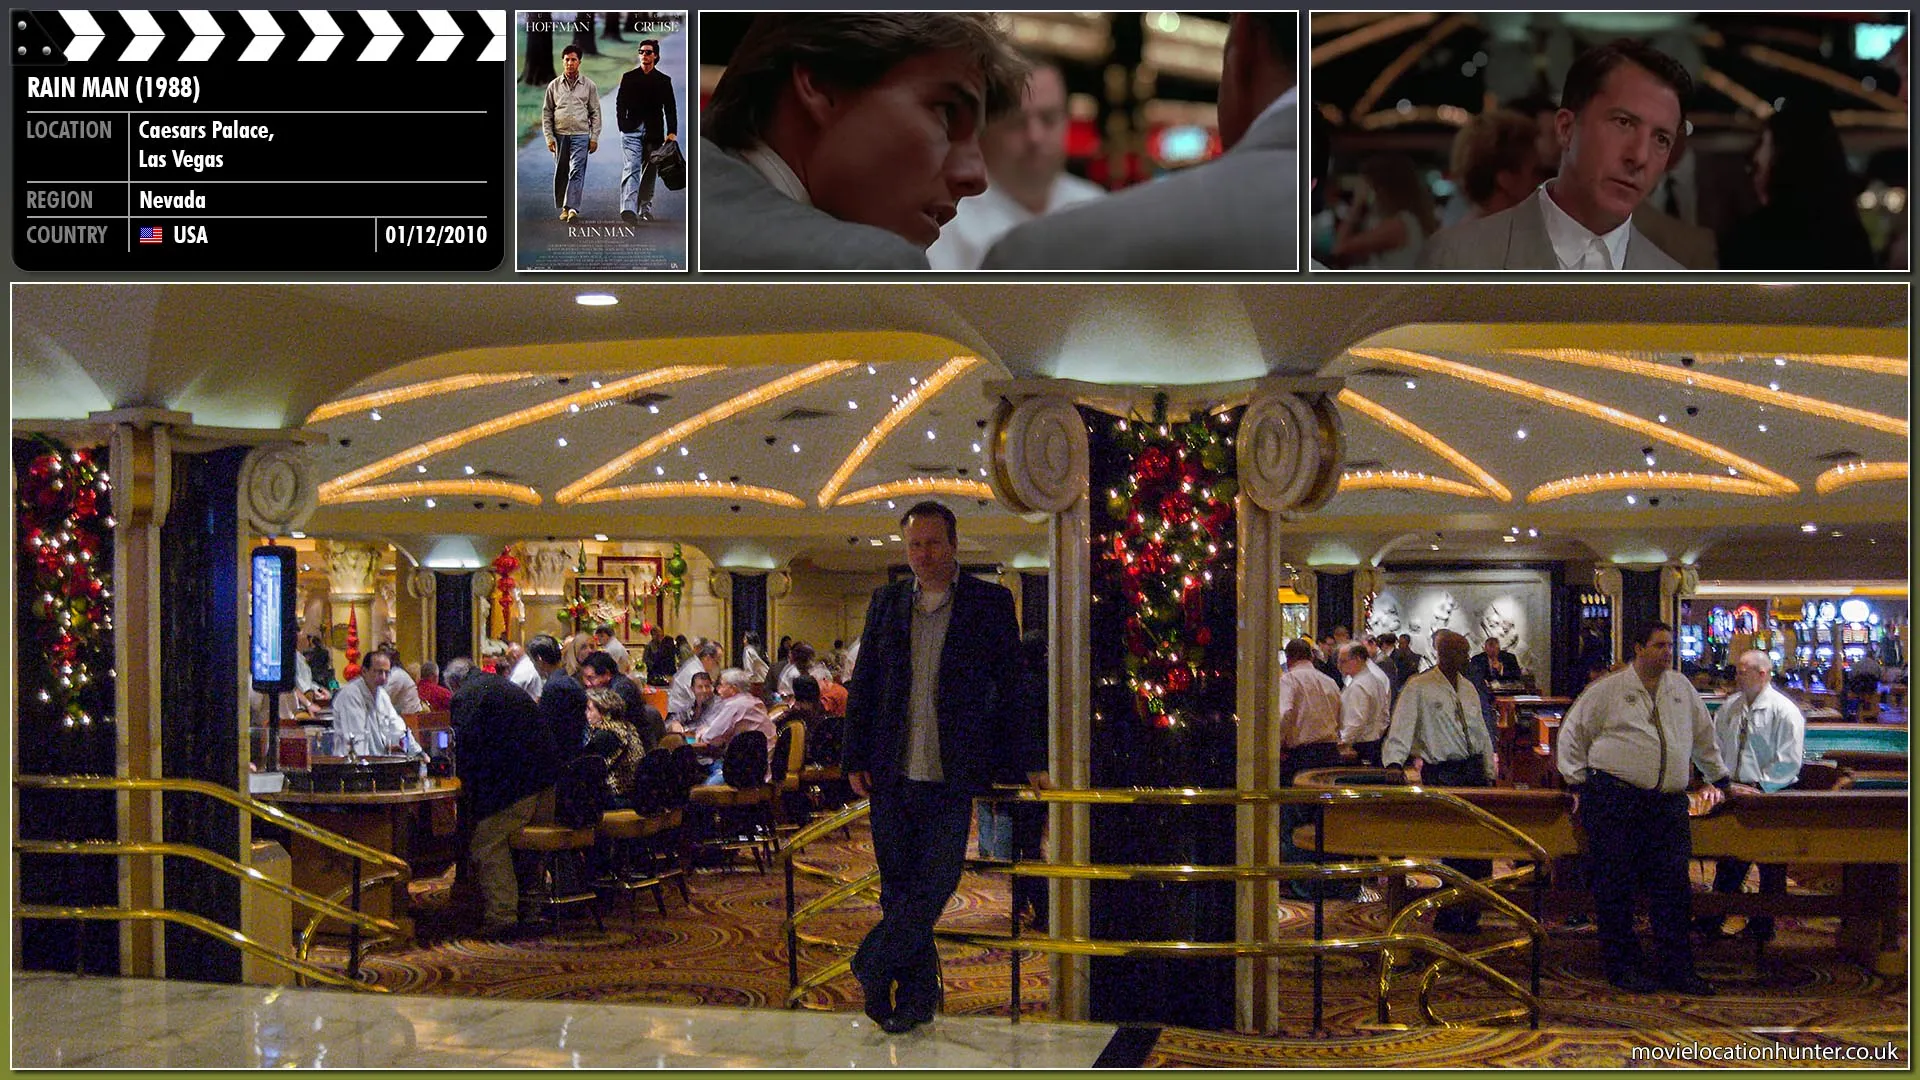 Filming location photo, shot in USA, for Rain Man (1988). Scene description: Casino bosses are skeptical that anyone can count cards with a six deck shoe, and after reviewing security footage, they ask Charlie (Tom Cruise) and Raymond (Dustin Hoffman) to leave. However, the casino bosses allow Charlie to keep the money.